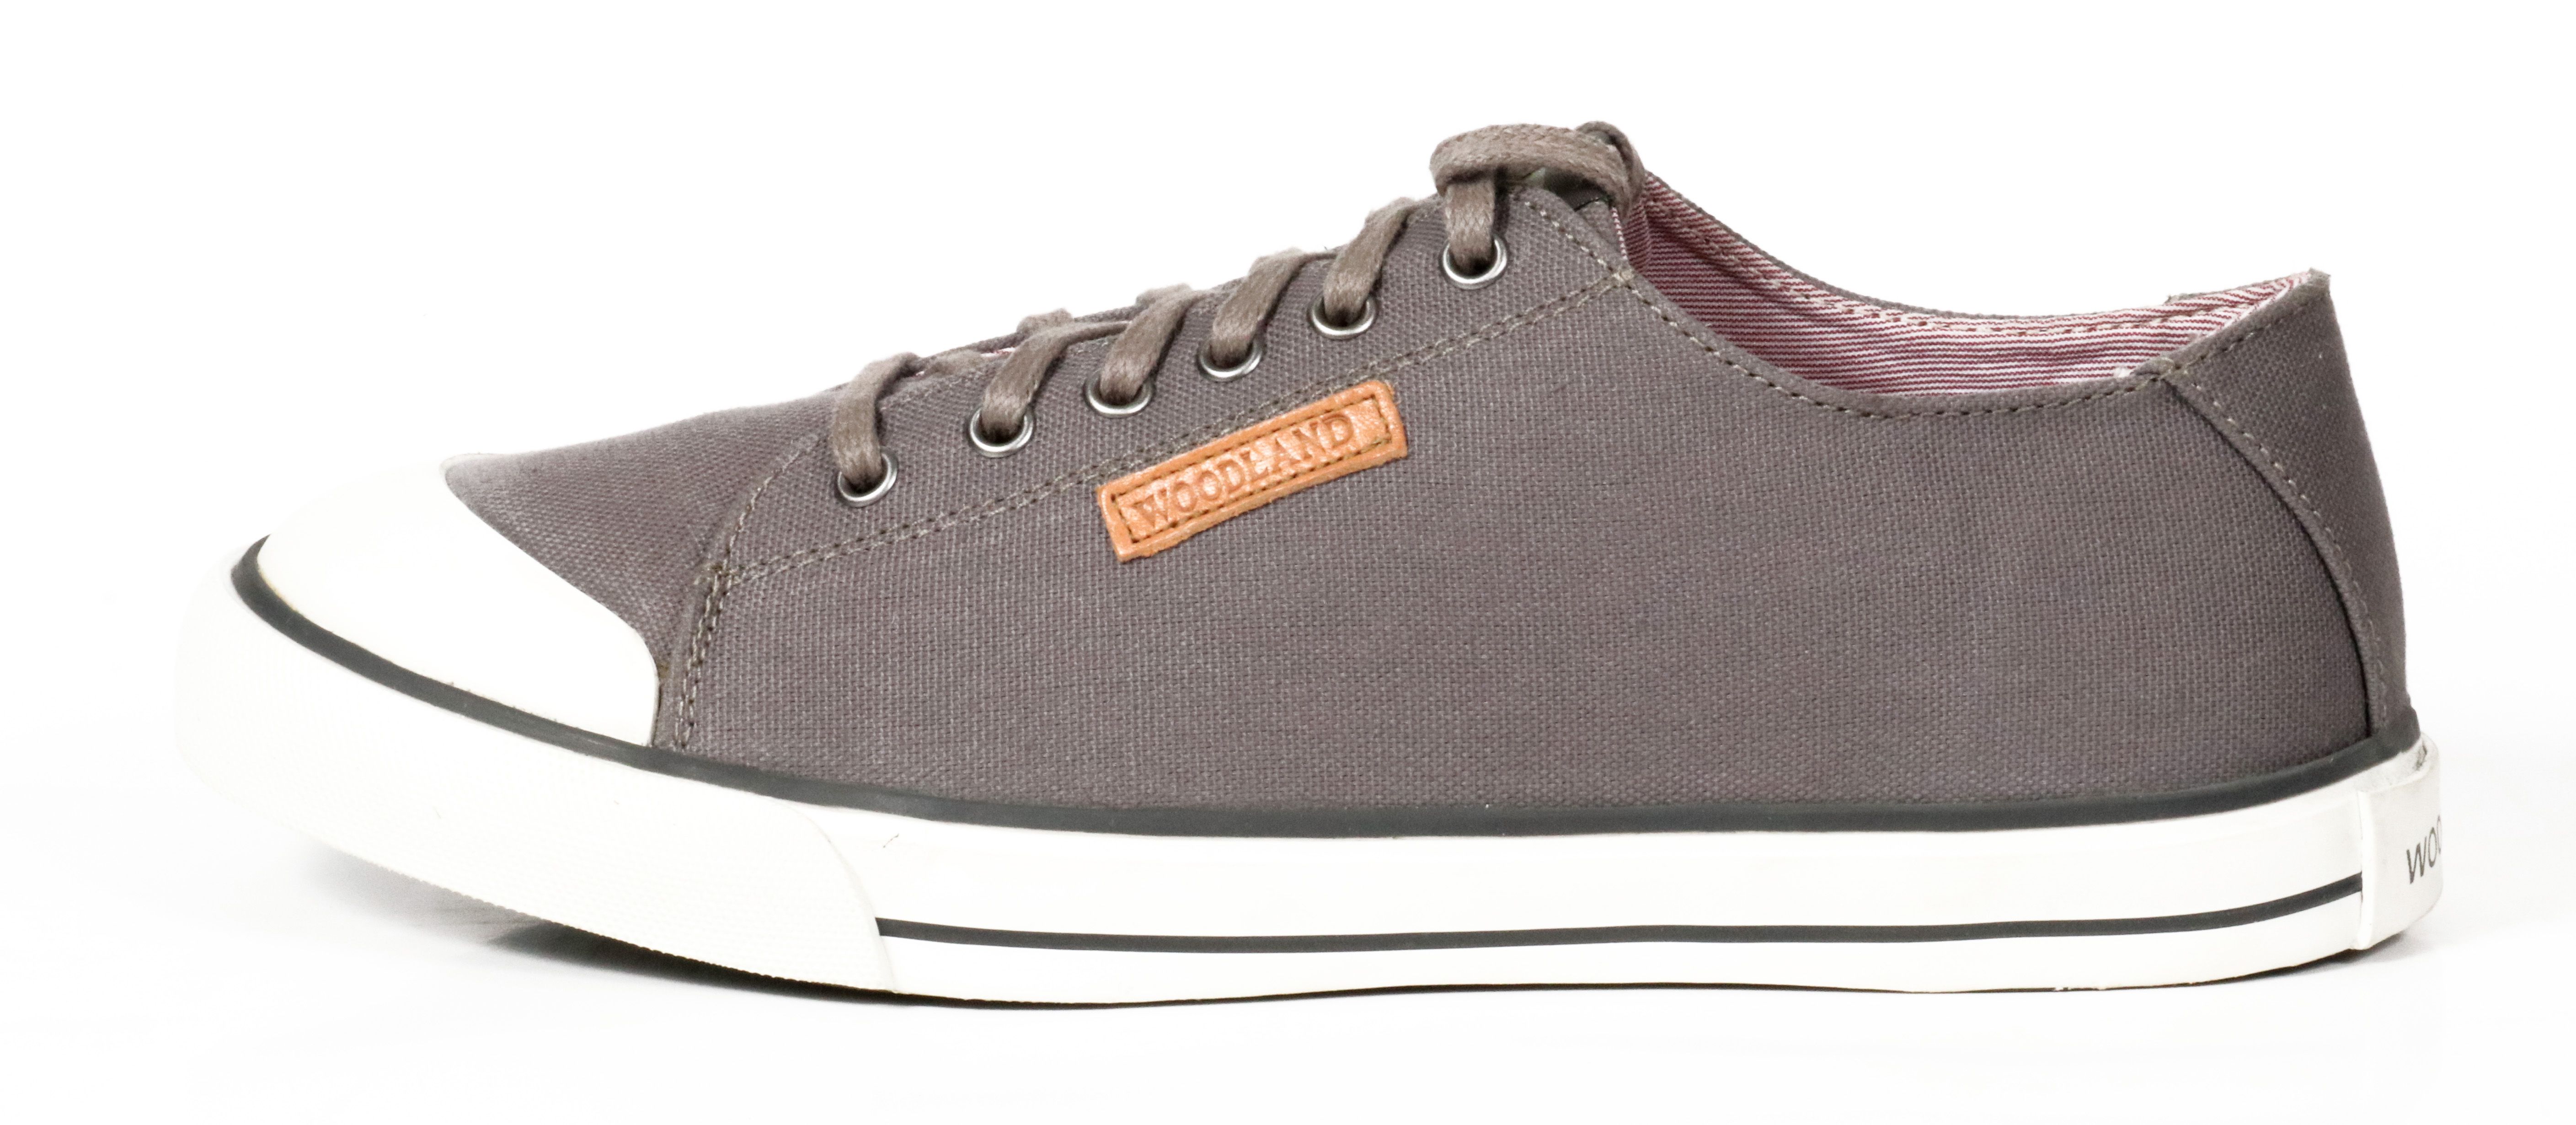 WOODLAND GC 1951115C / GREY Sneakers Gray Casual Shoes - Buy WOODLAND ...